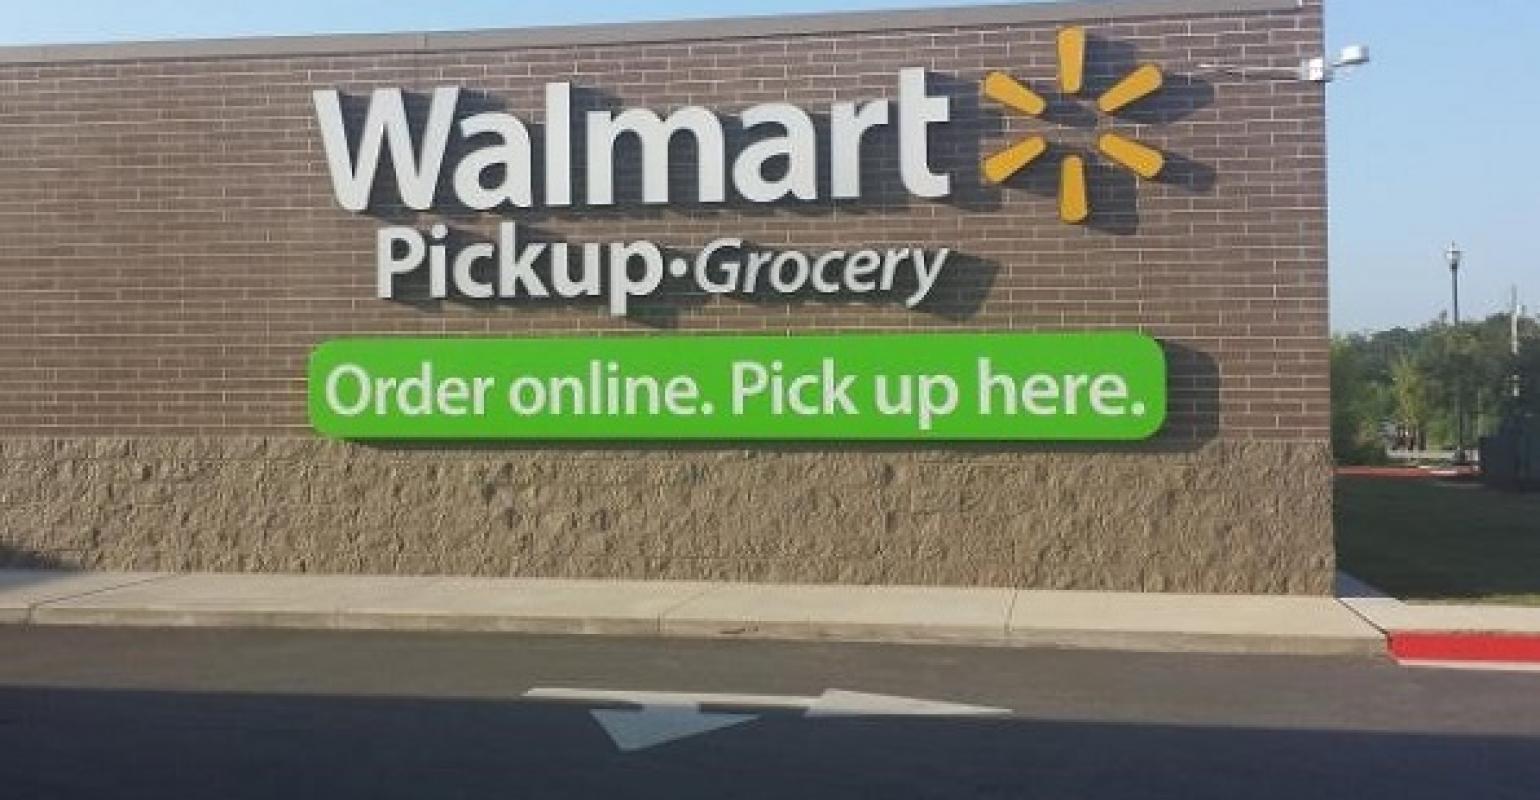 Walmart Orlando - Turkey Lake Rd - Our personal shoppers are ready to go to  fulfill your online grocery pickup needs. Reserve your order today for our  August 4th grand opening.